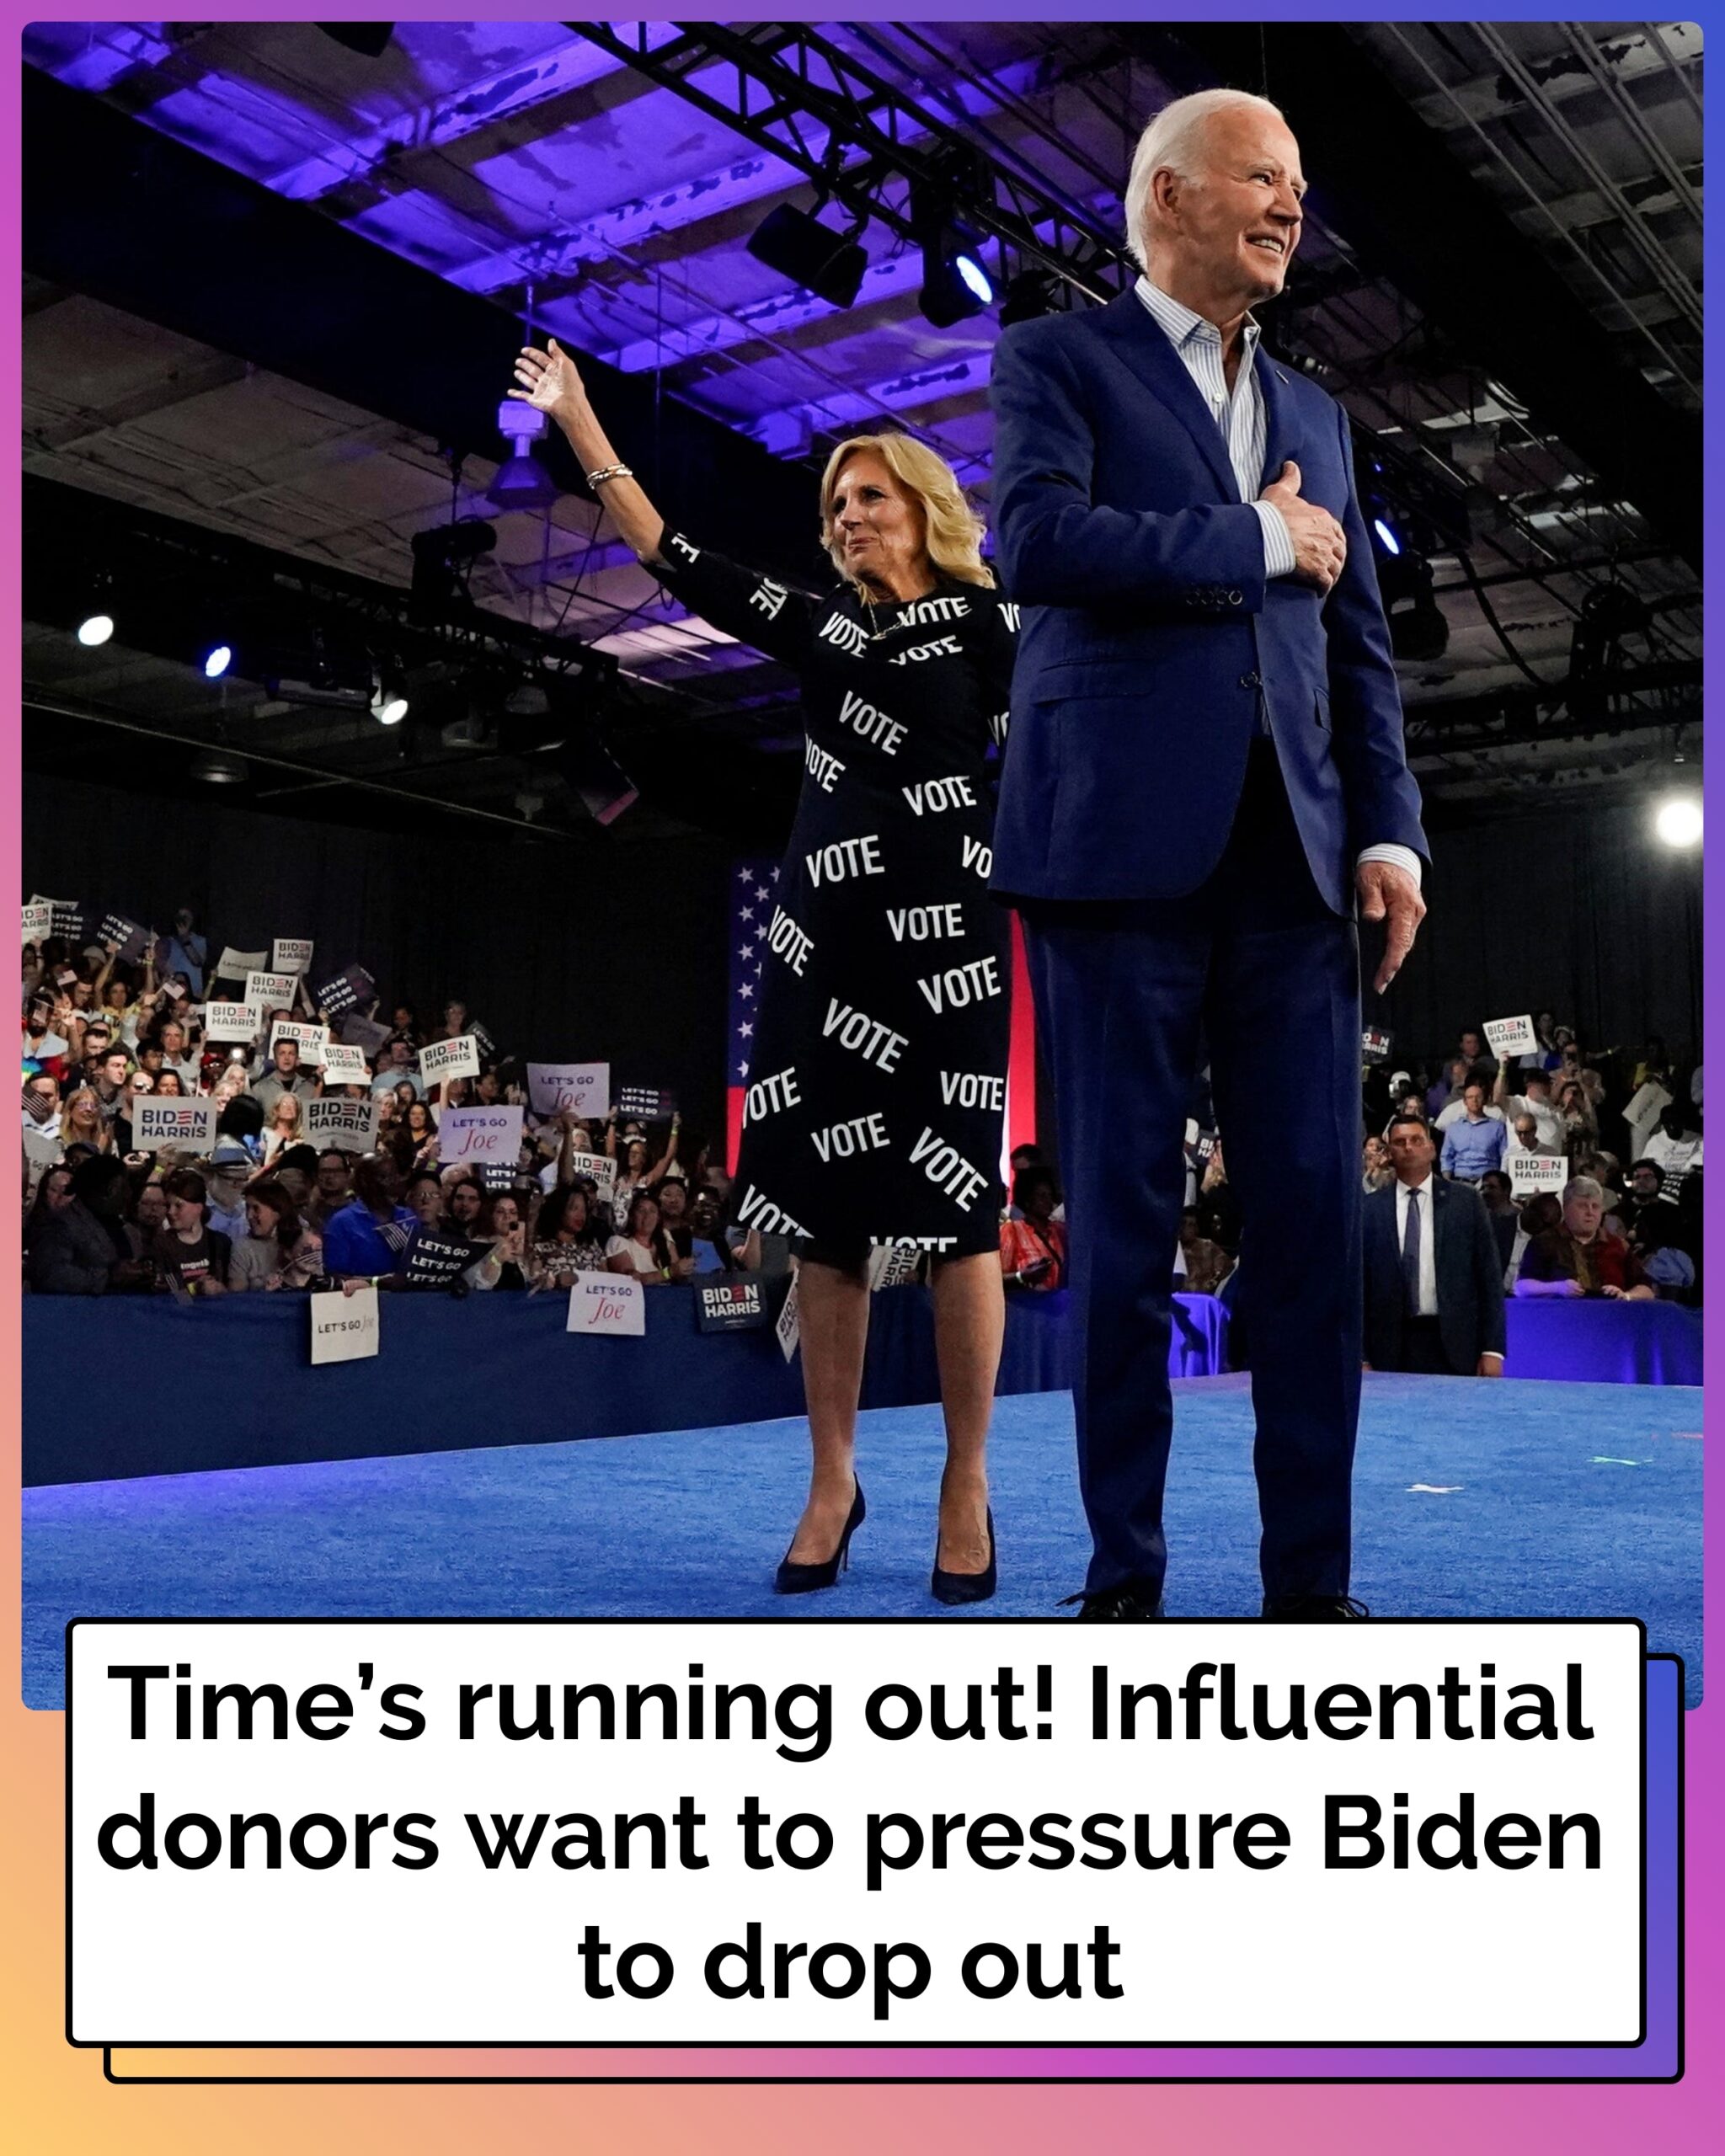 Influential donors want to pressure Biden to drop out